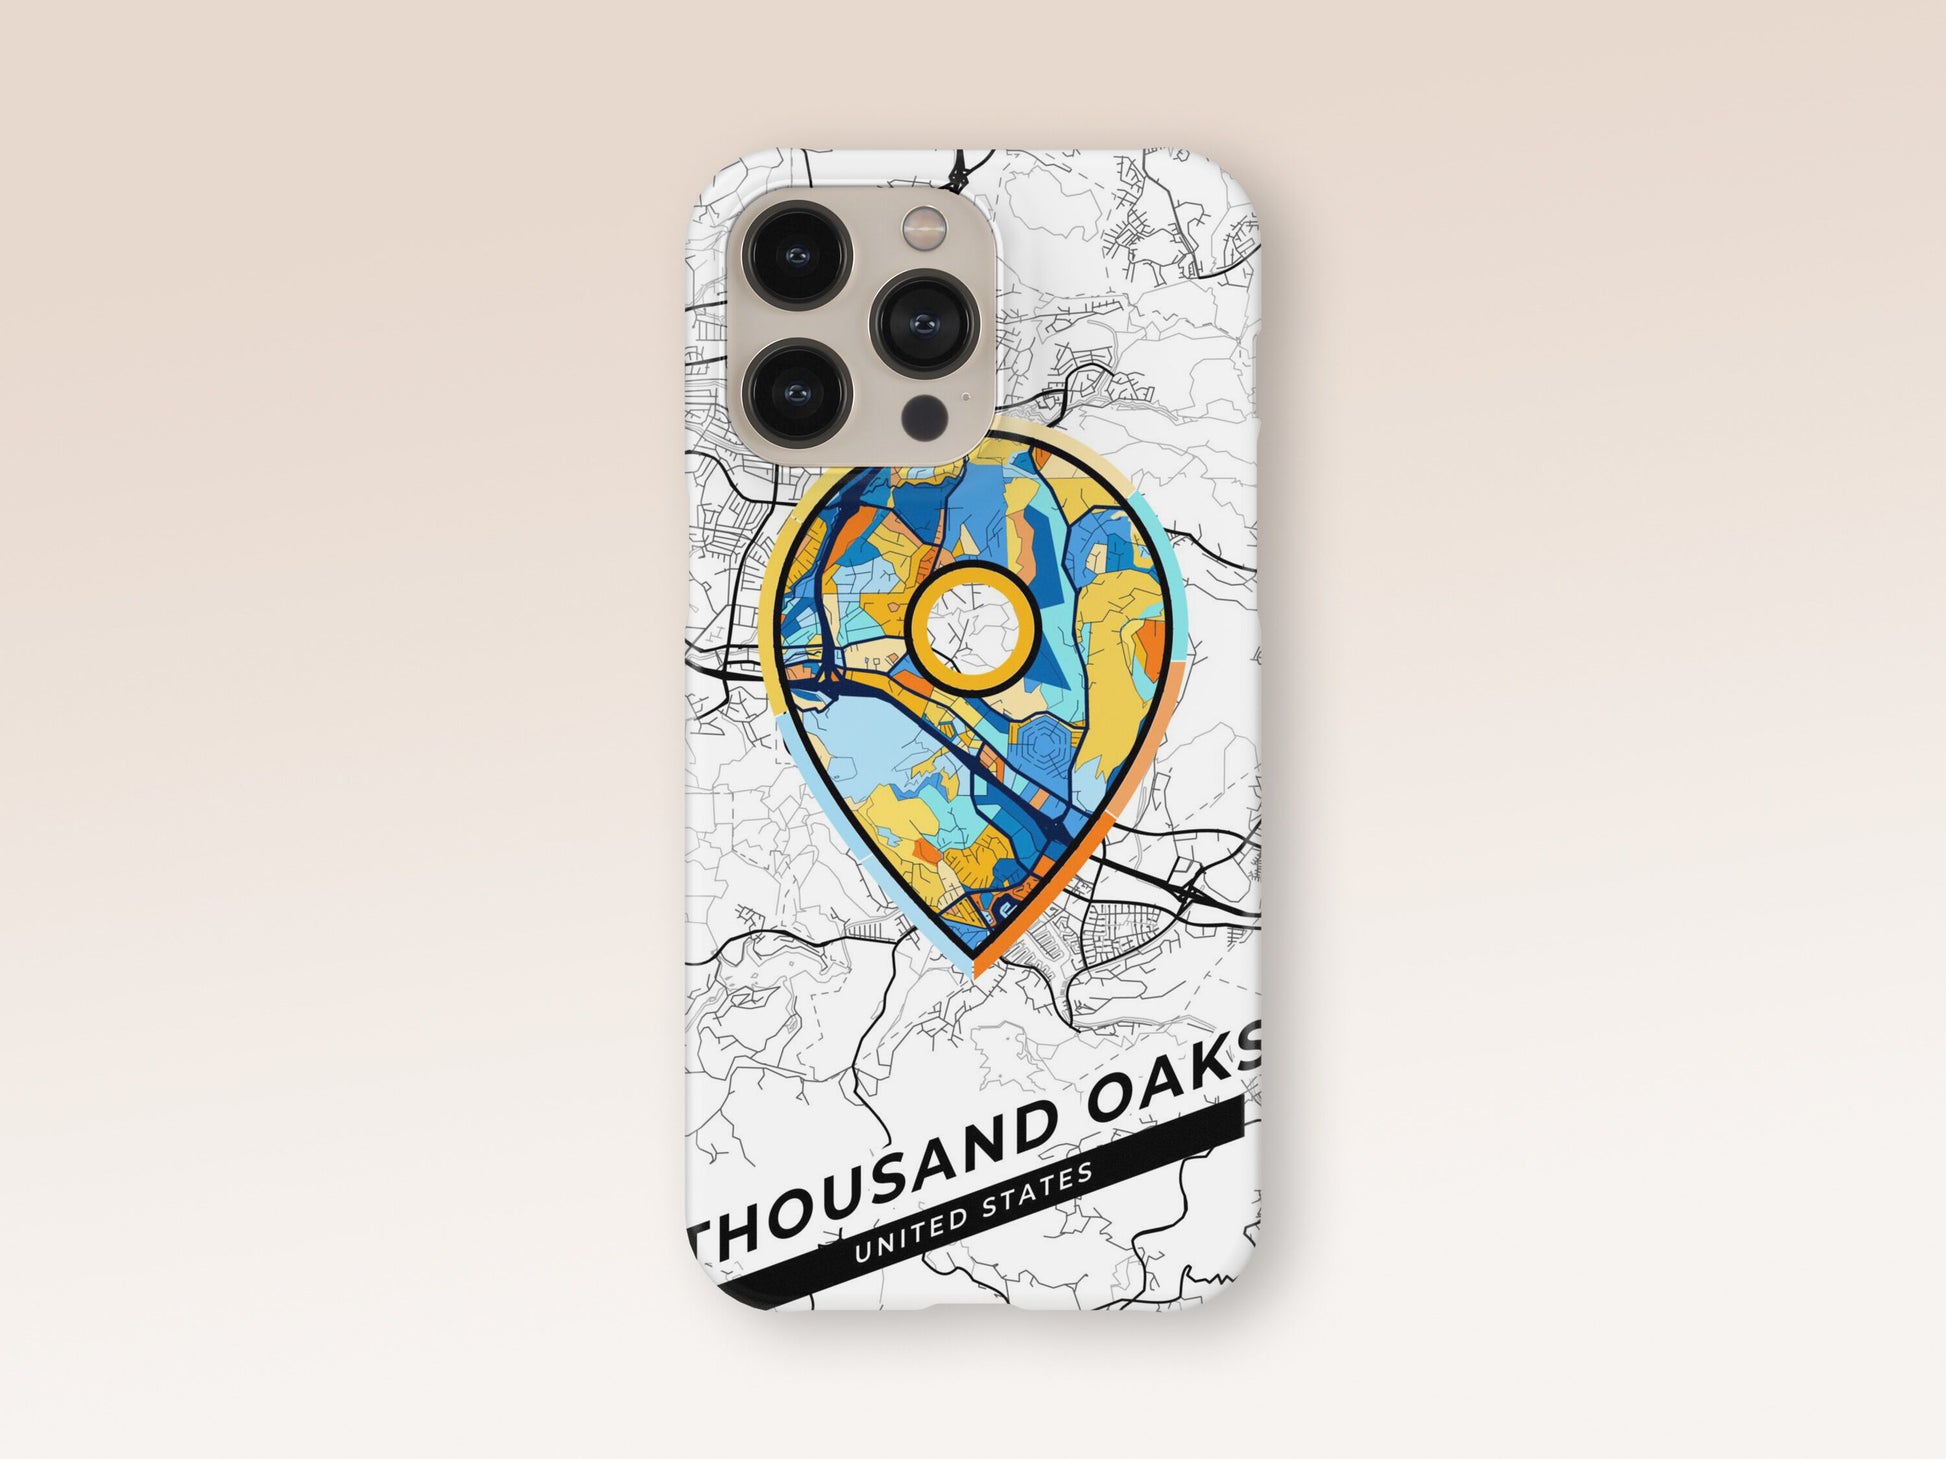 Thousand Oaks California slim phone case with colorful icon 1